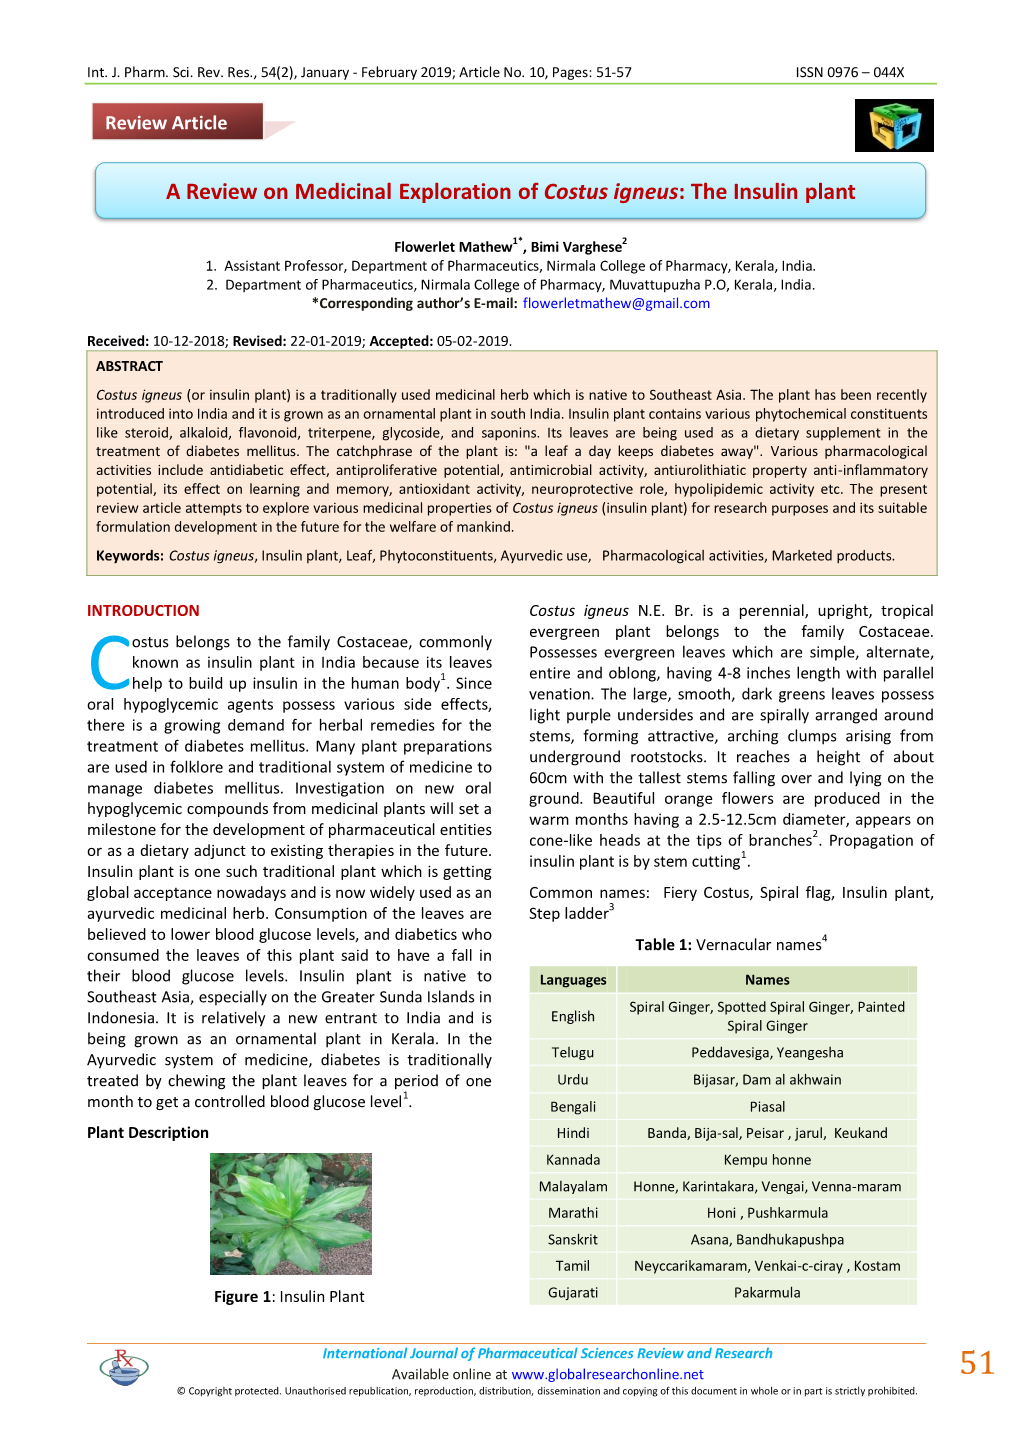 A Review on Medicinal Exploration of Costus Igneus: the Insulin Plant